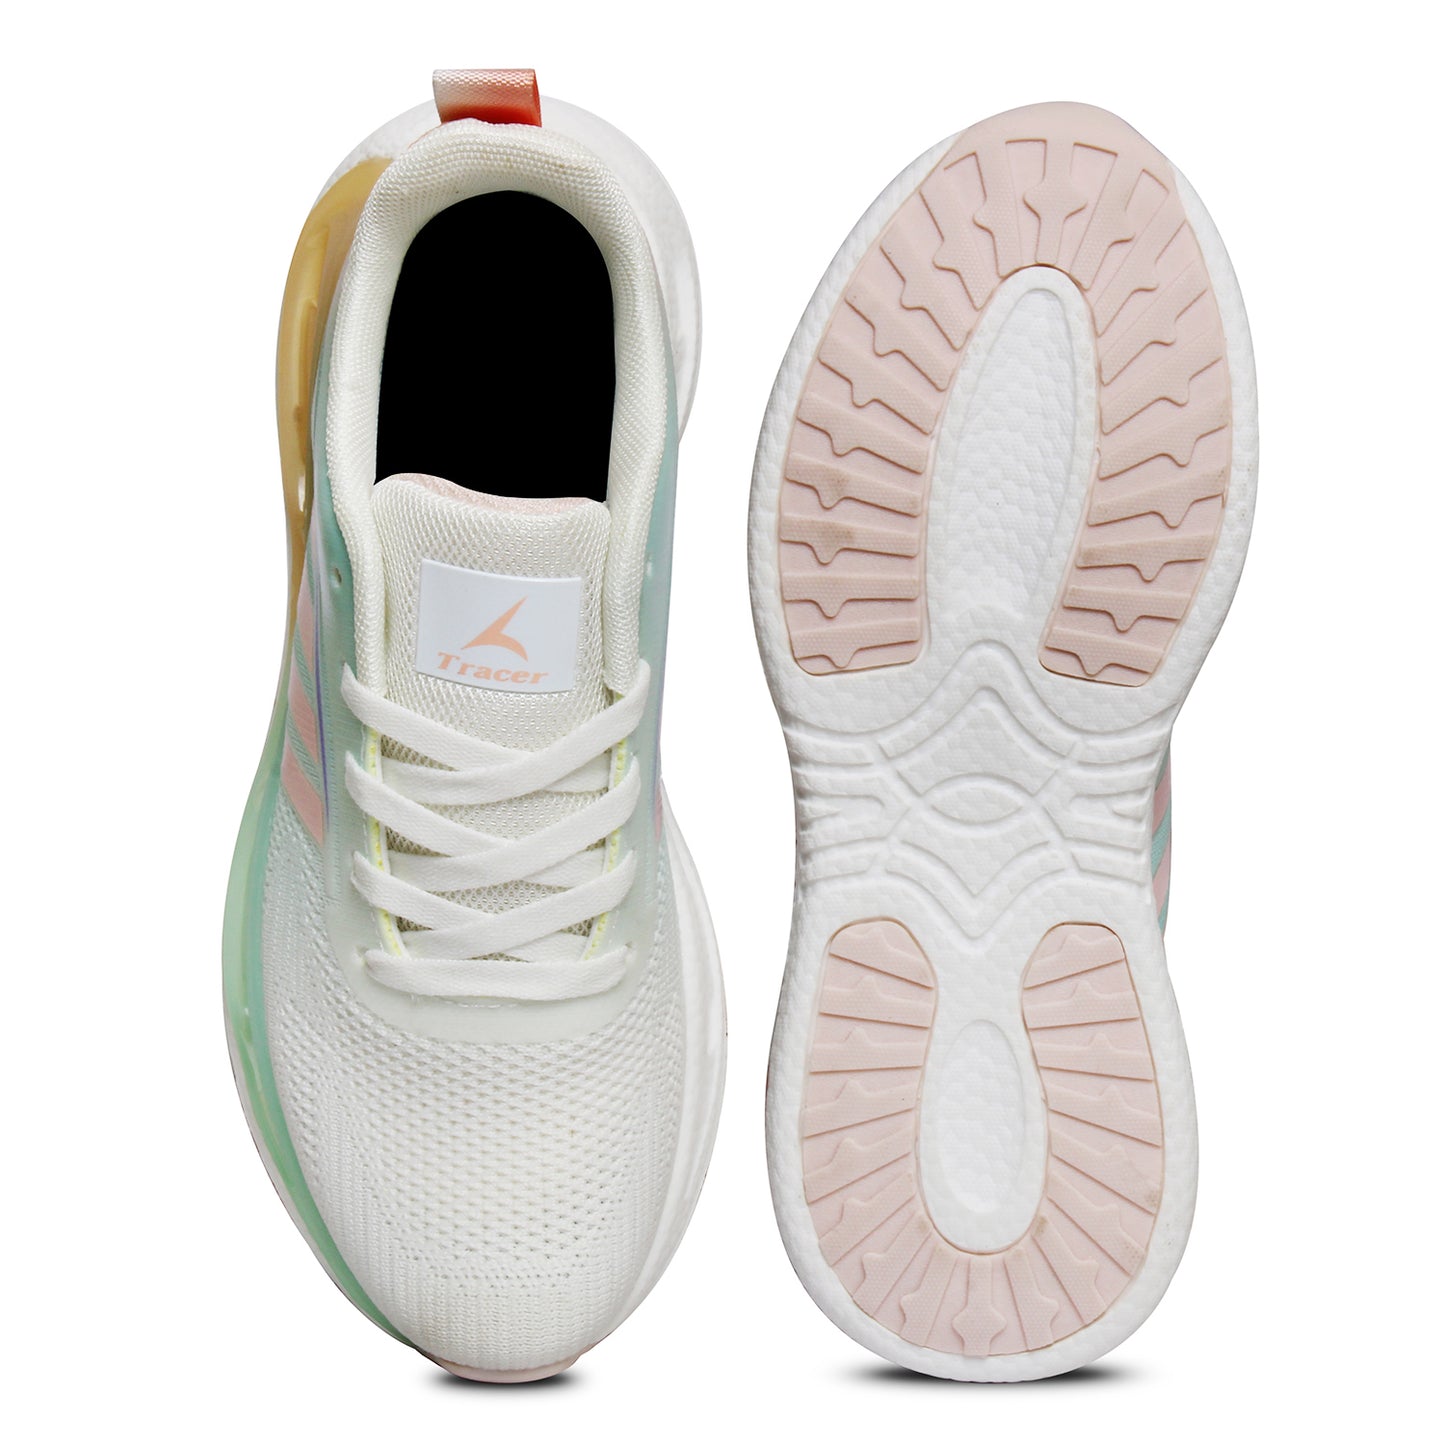 Tracer obsession-l-2502  Women's Sneakers White Green